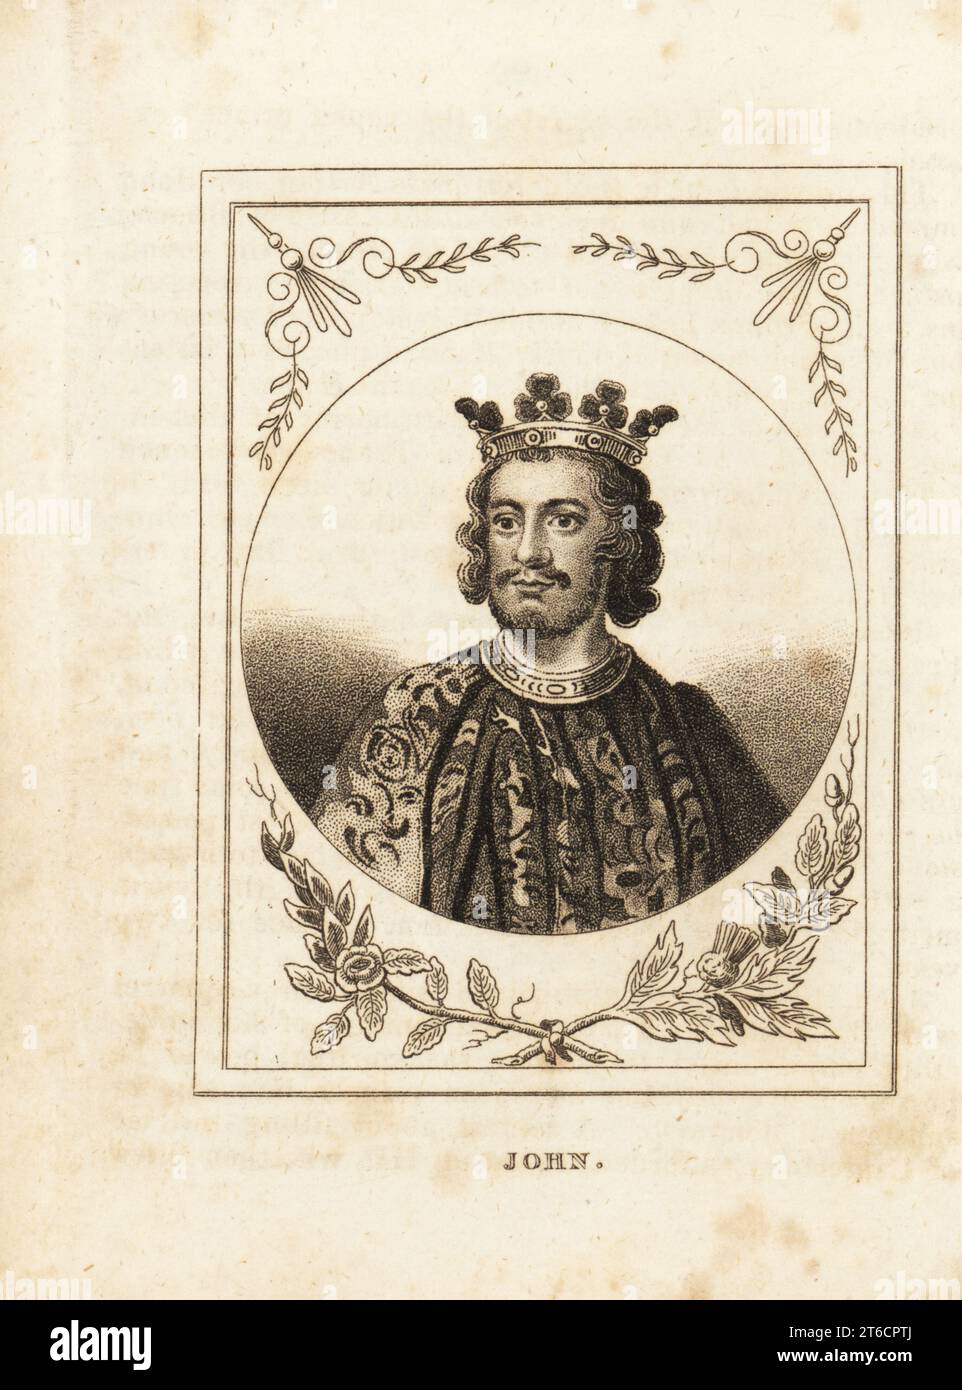 Portrait of King John of England, reigned 1199-1216. In crown, collar and armorial robe. Copperplate engraving from M. A. Jones History of England from Julius Caesar to George IV, G. Virtue, 26 Ivy Lane, London, 1836. Stock Photo